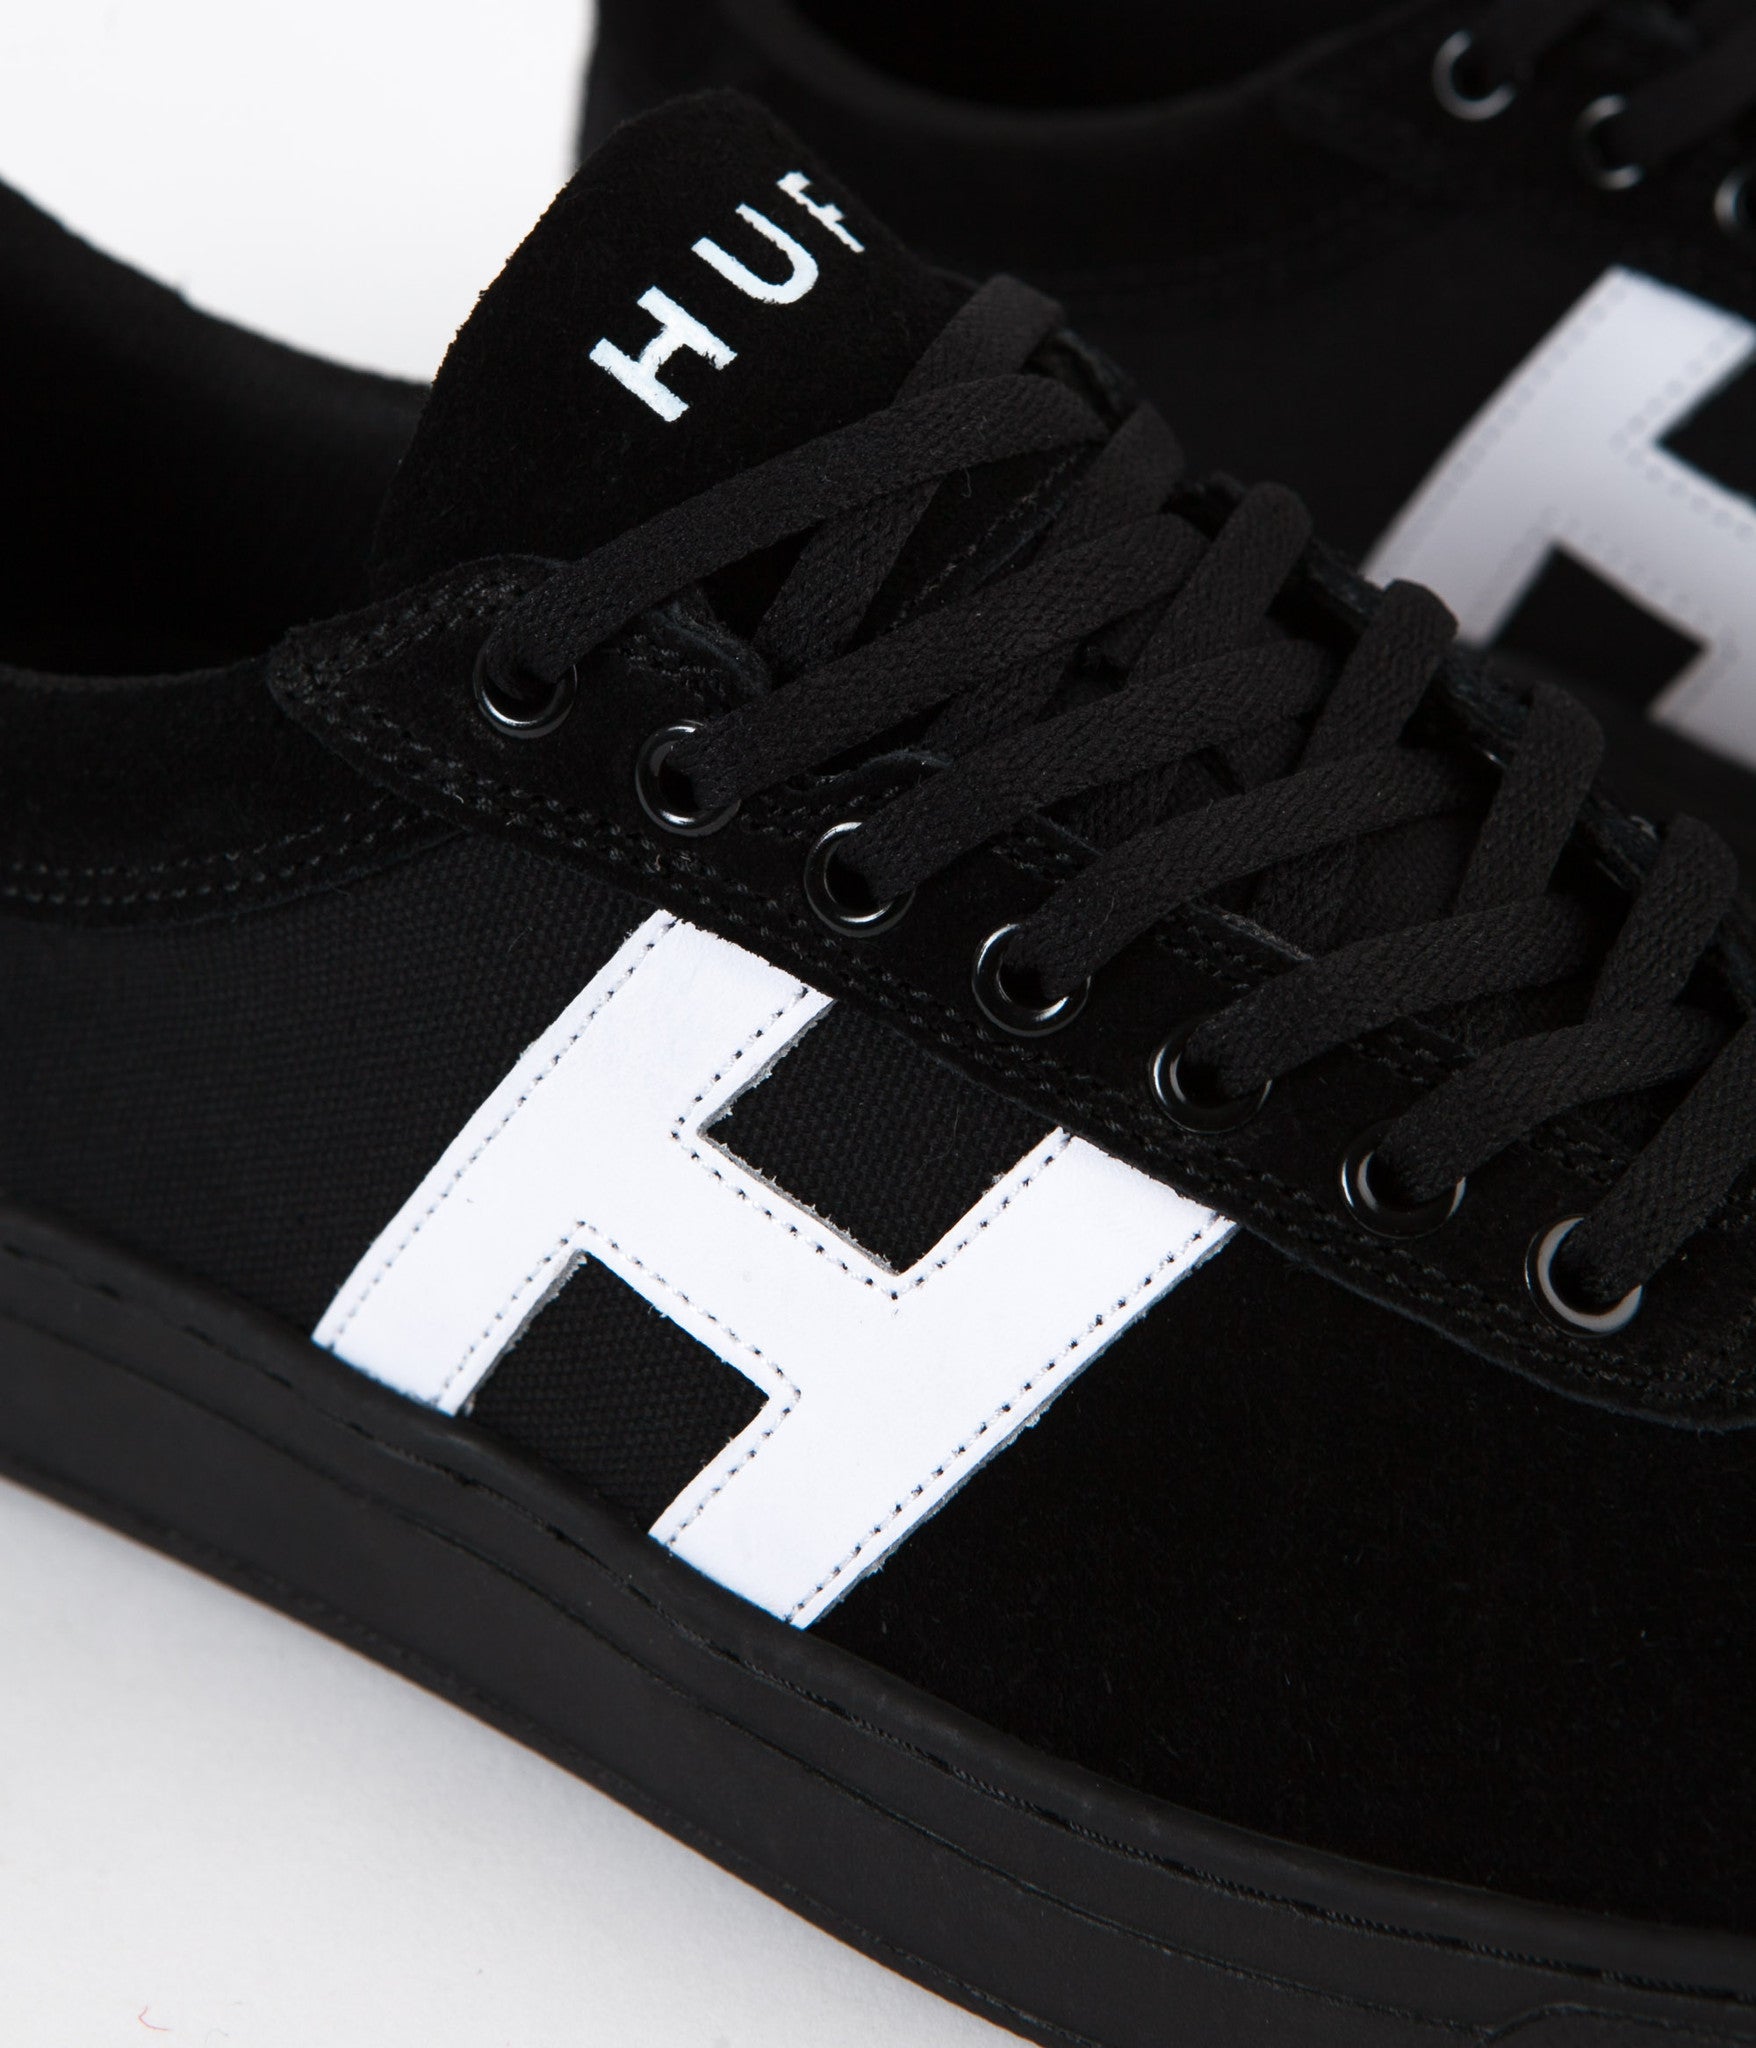 huf black and white shoes